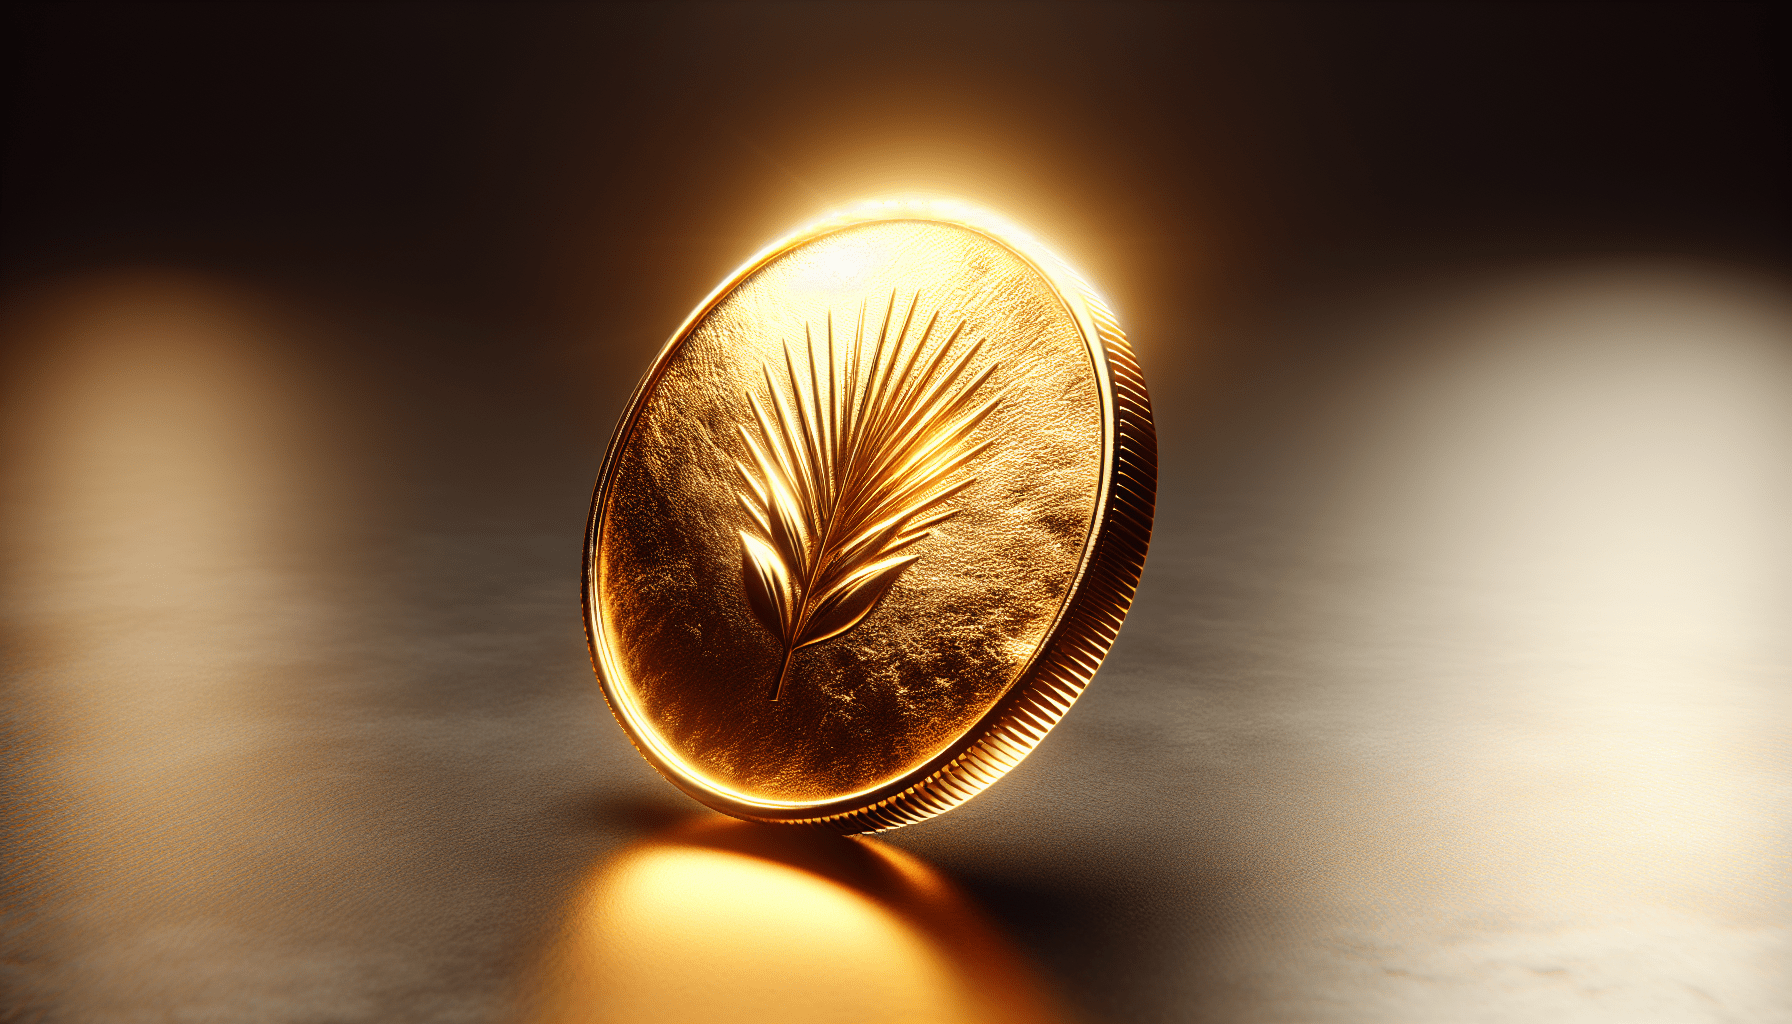 Can I Purchase Gold Coins Through Malaysian Banks For Investment?